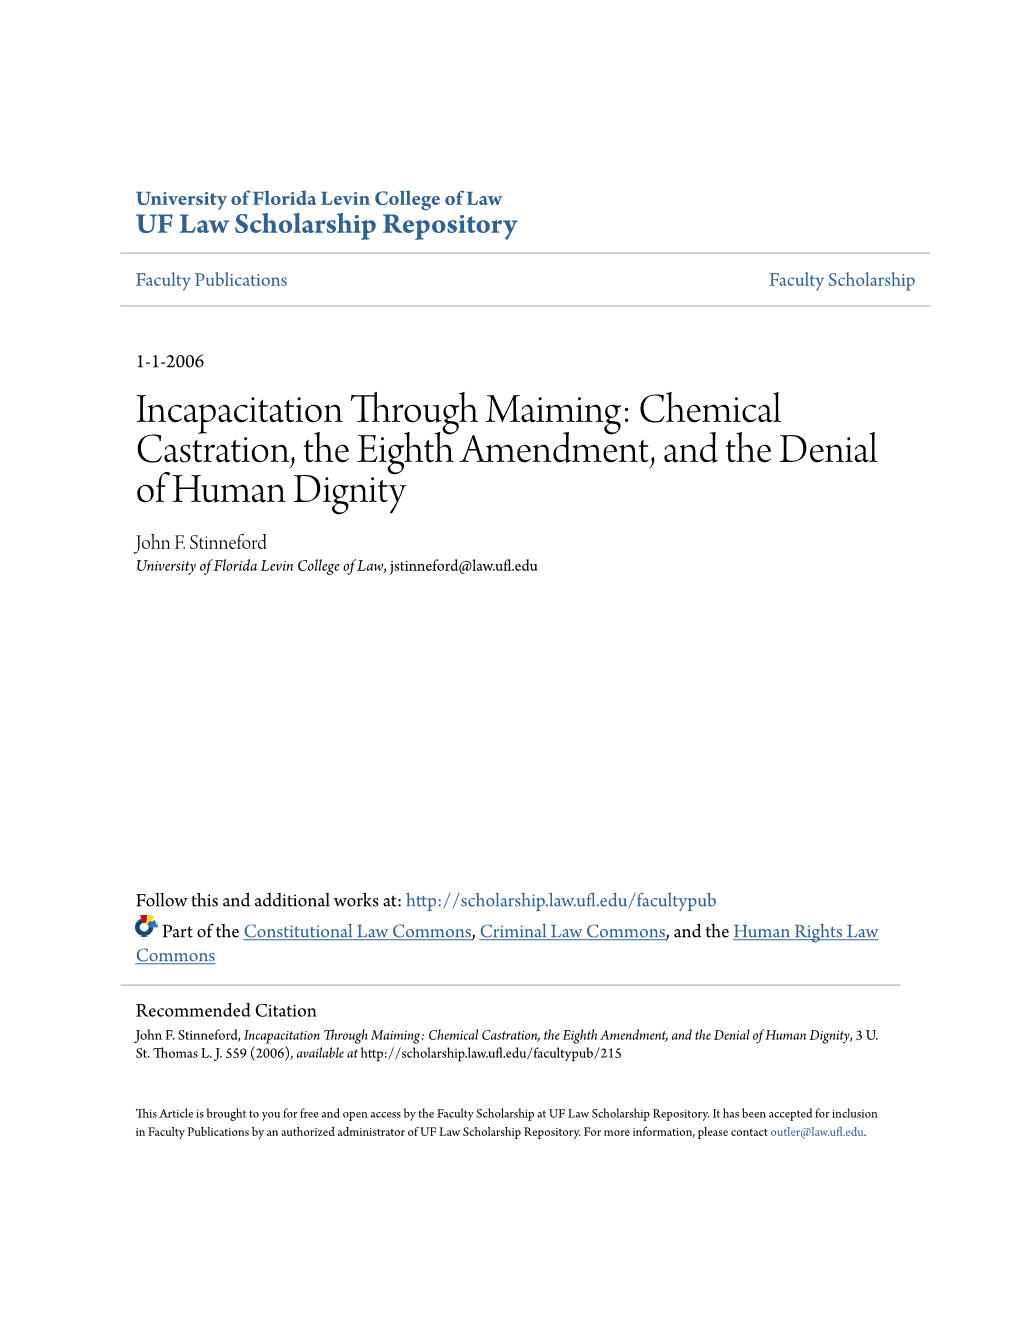 Incapacitation Through Maiming: Chemical Castration, the Eighth Amendment, and the Denial of Human Dignity John F